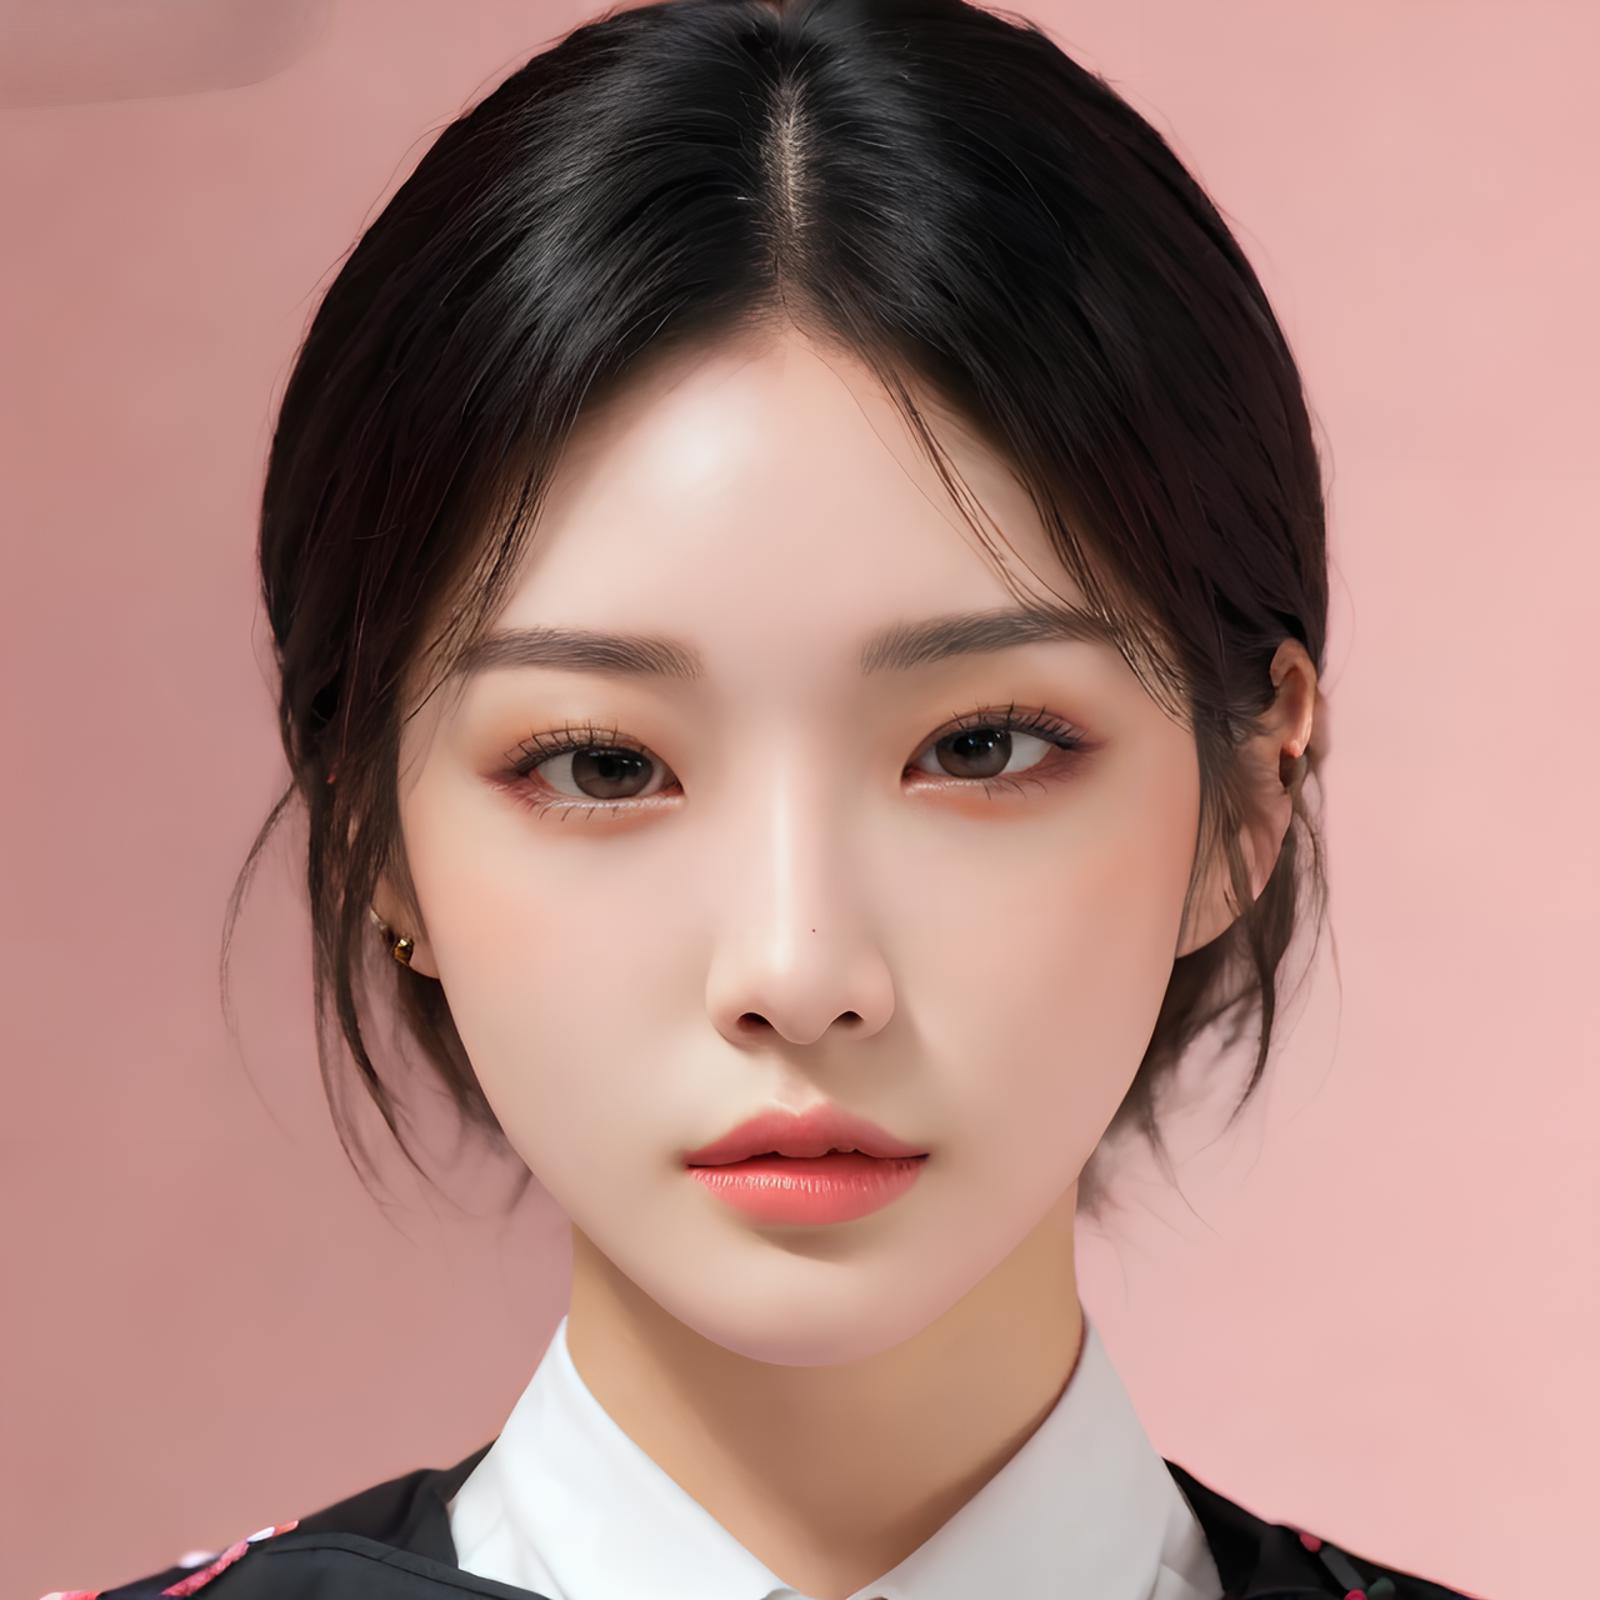 Not Chungha image by Tissue_AI